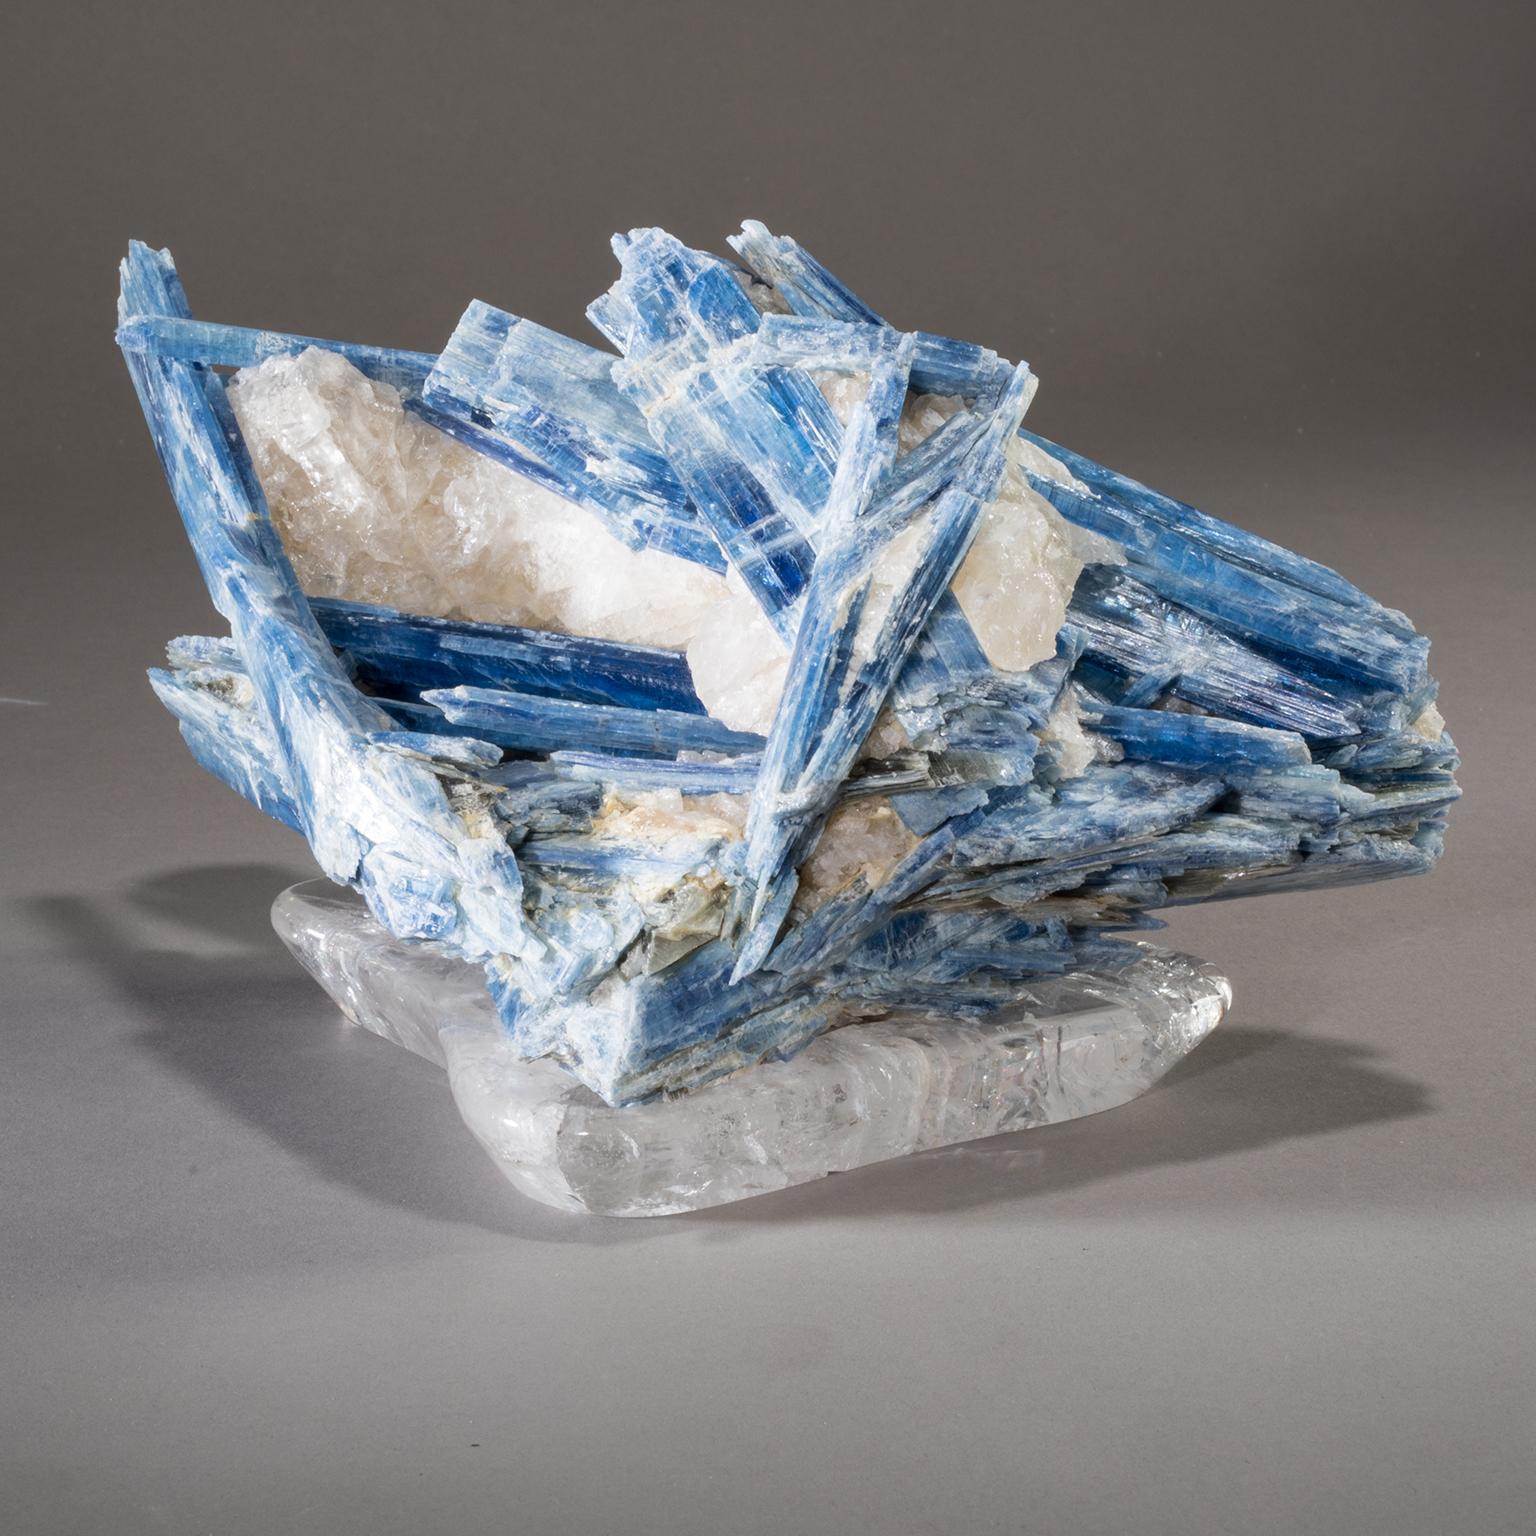 KYANITE ON CRYSTAL BASE

Shards of vibrant blue kyanite climb towards the heavens in Studio Greytak’s Kyanite with Quartz on Crystal Base. Like the remnants of a hidden staircase ascending Mount Olympus, the kyanite juts out from unyielding quartz